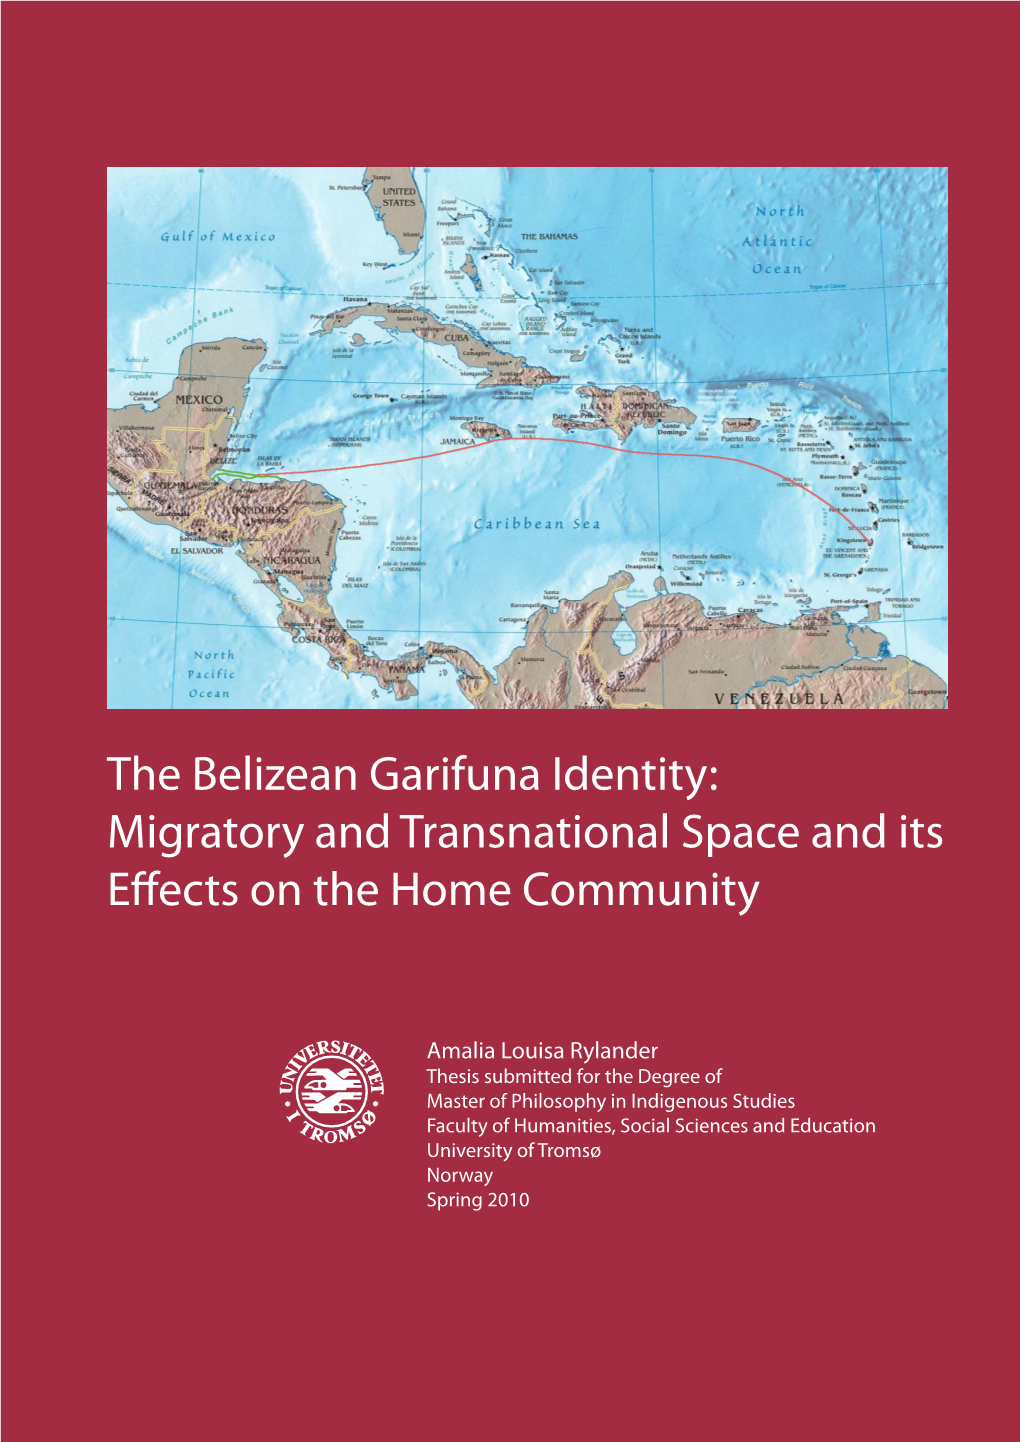 The Belizean Garifuna Identity: Migratory and Transnational Space and Its Effects on the Home Community